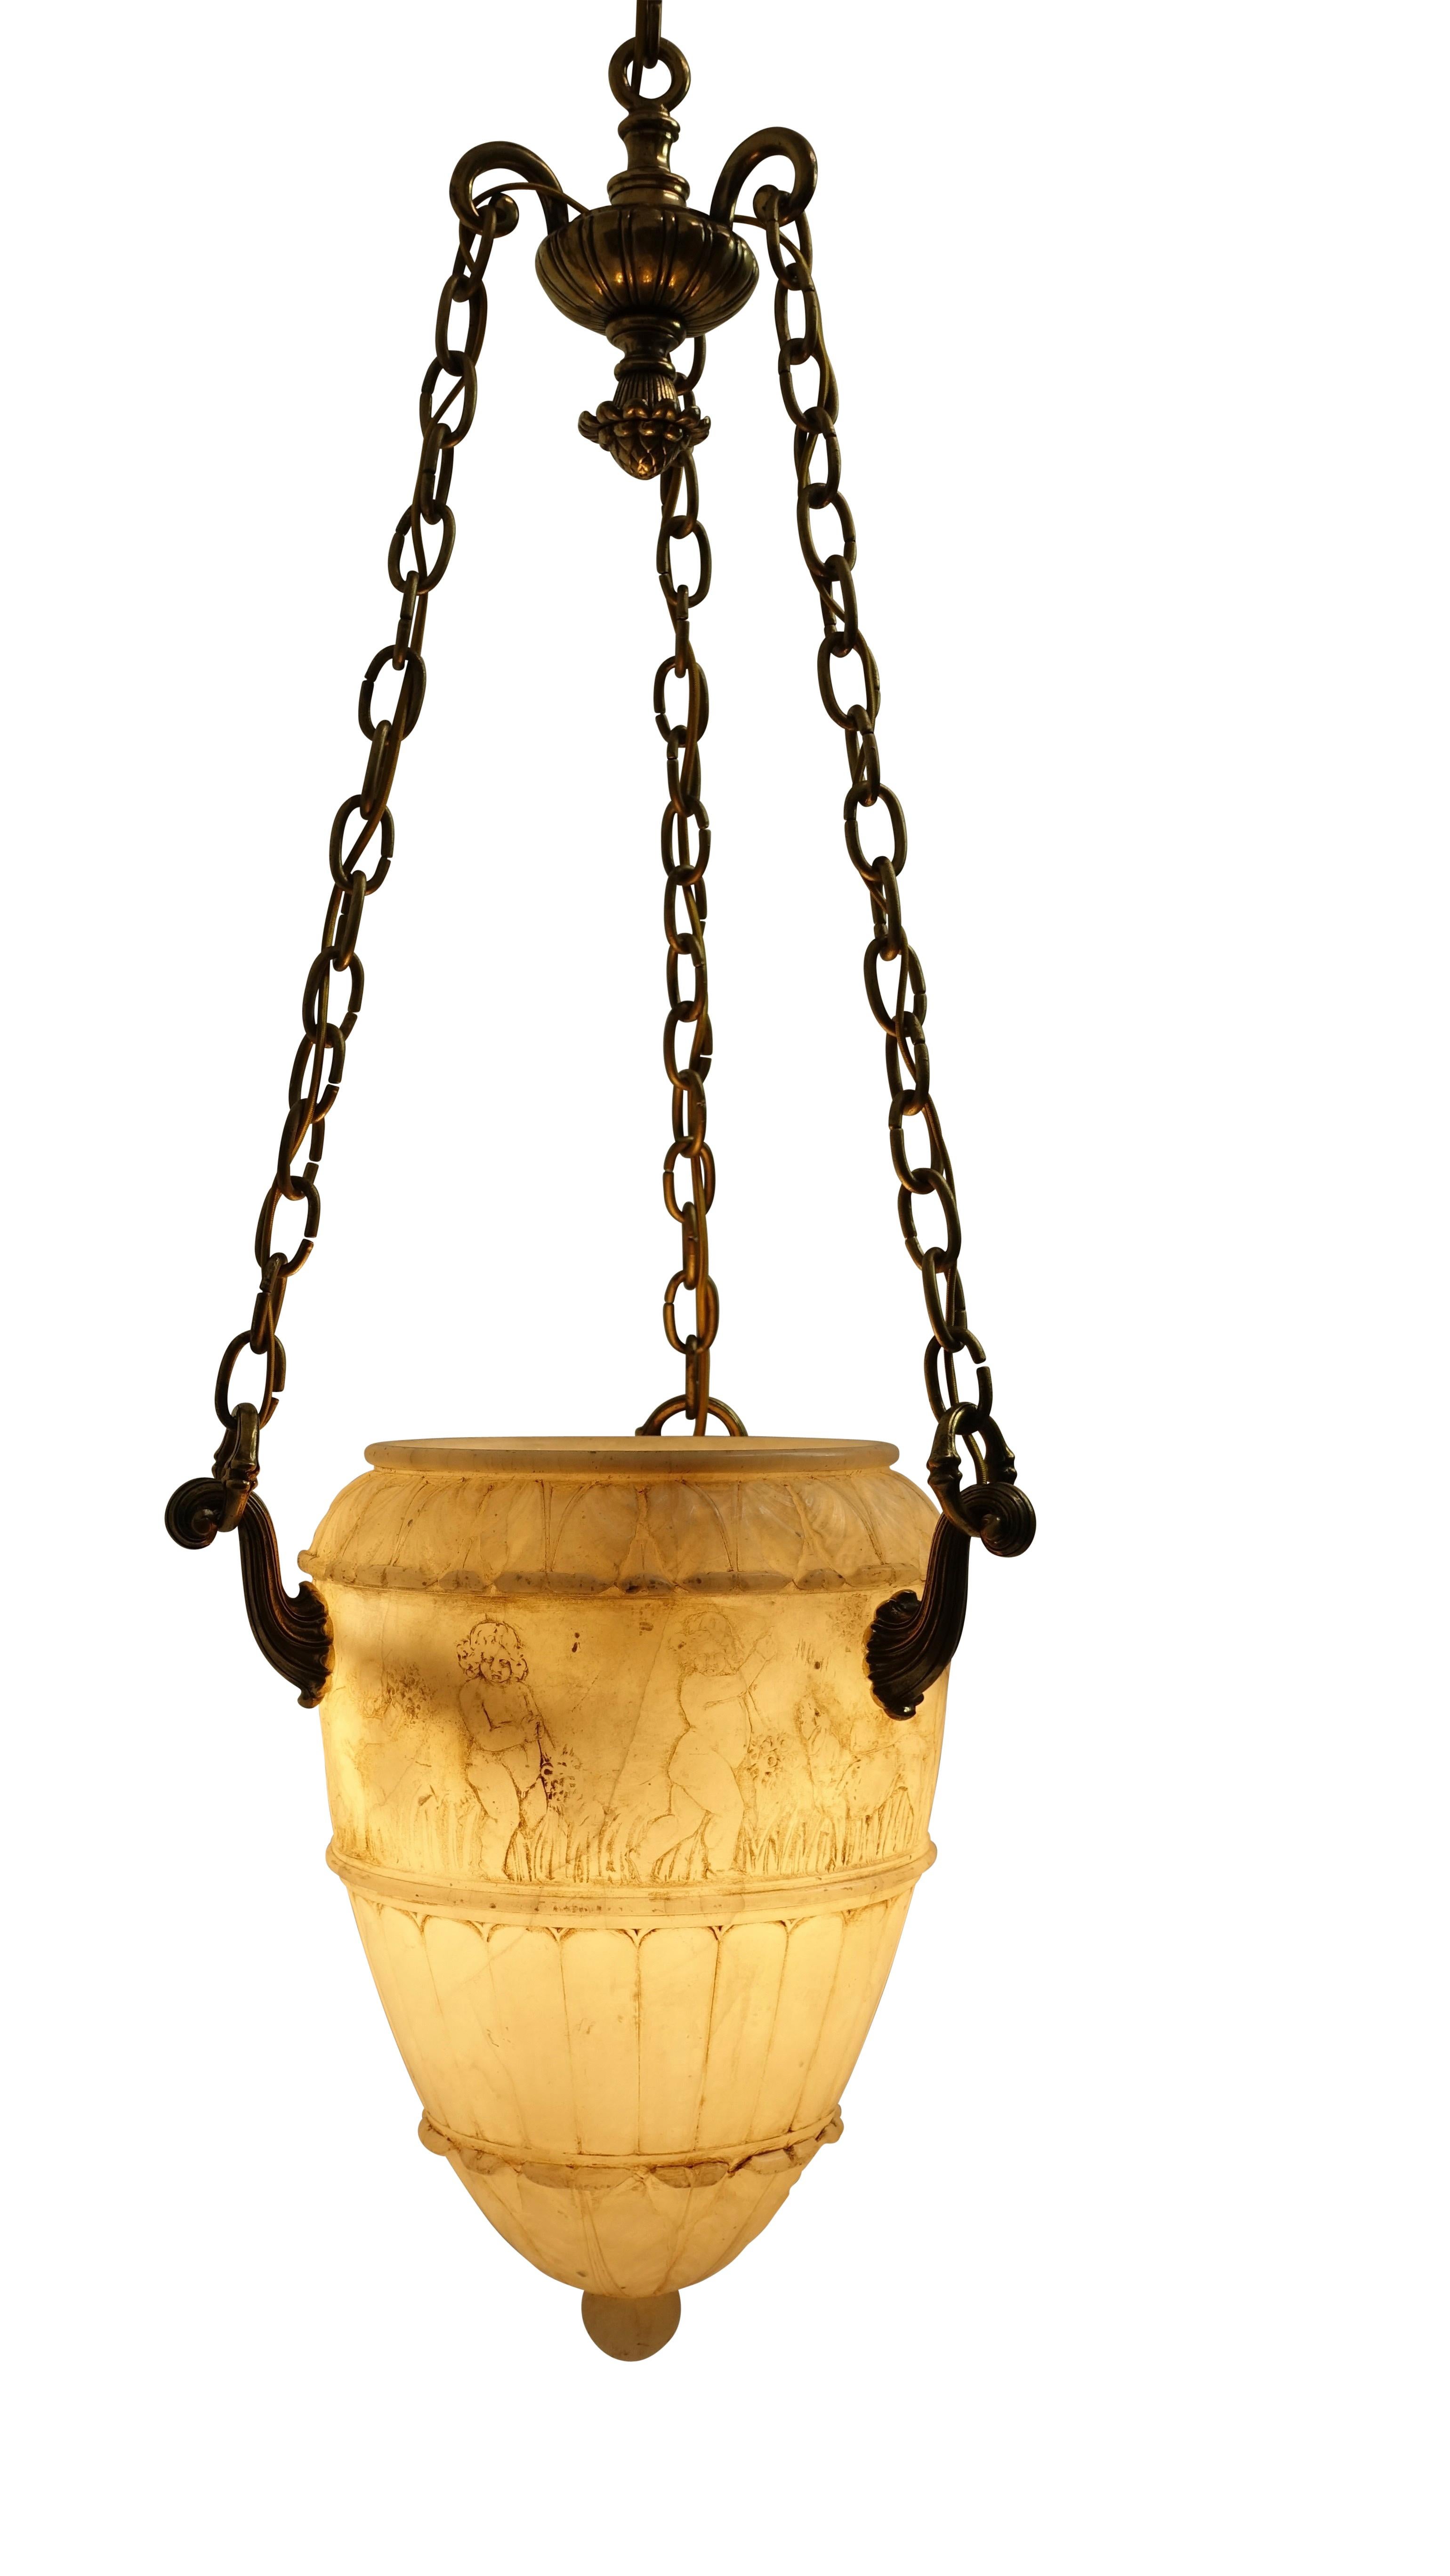 Carved Alabaster Pendant Light Fixture with Brass Hardware, Italian, circa 1910 For Sale 2